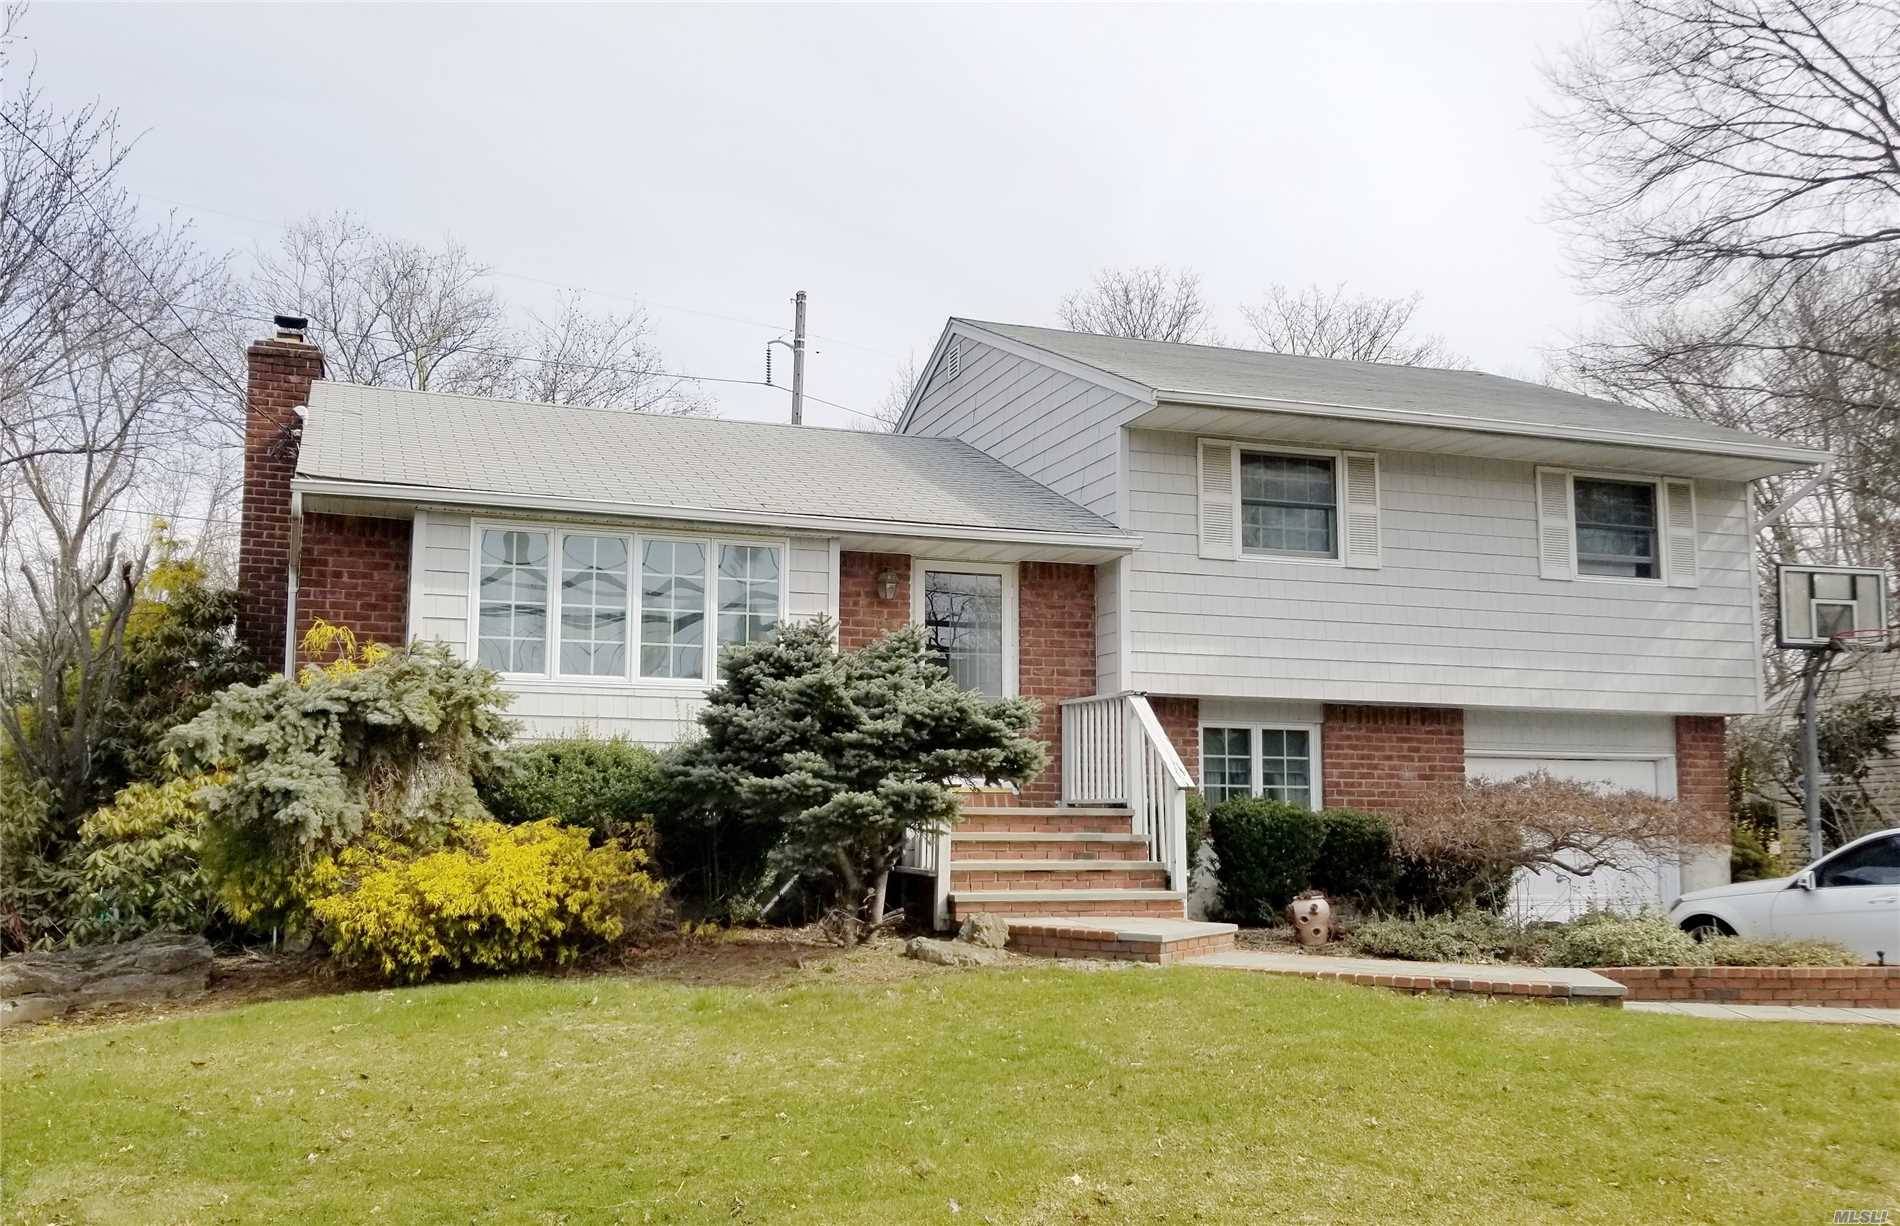 Beauty Property, Oversized Backyard, Just A 5-Minute Walk Away From The L.